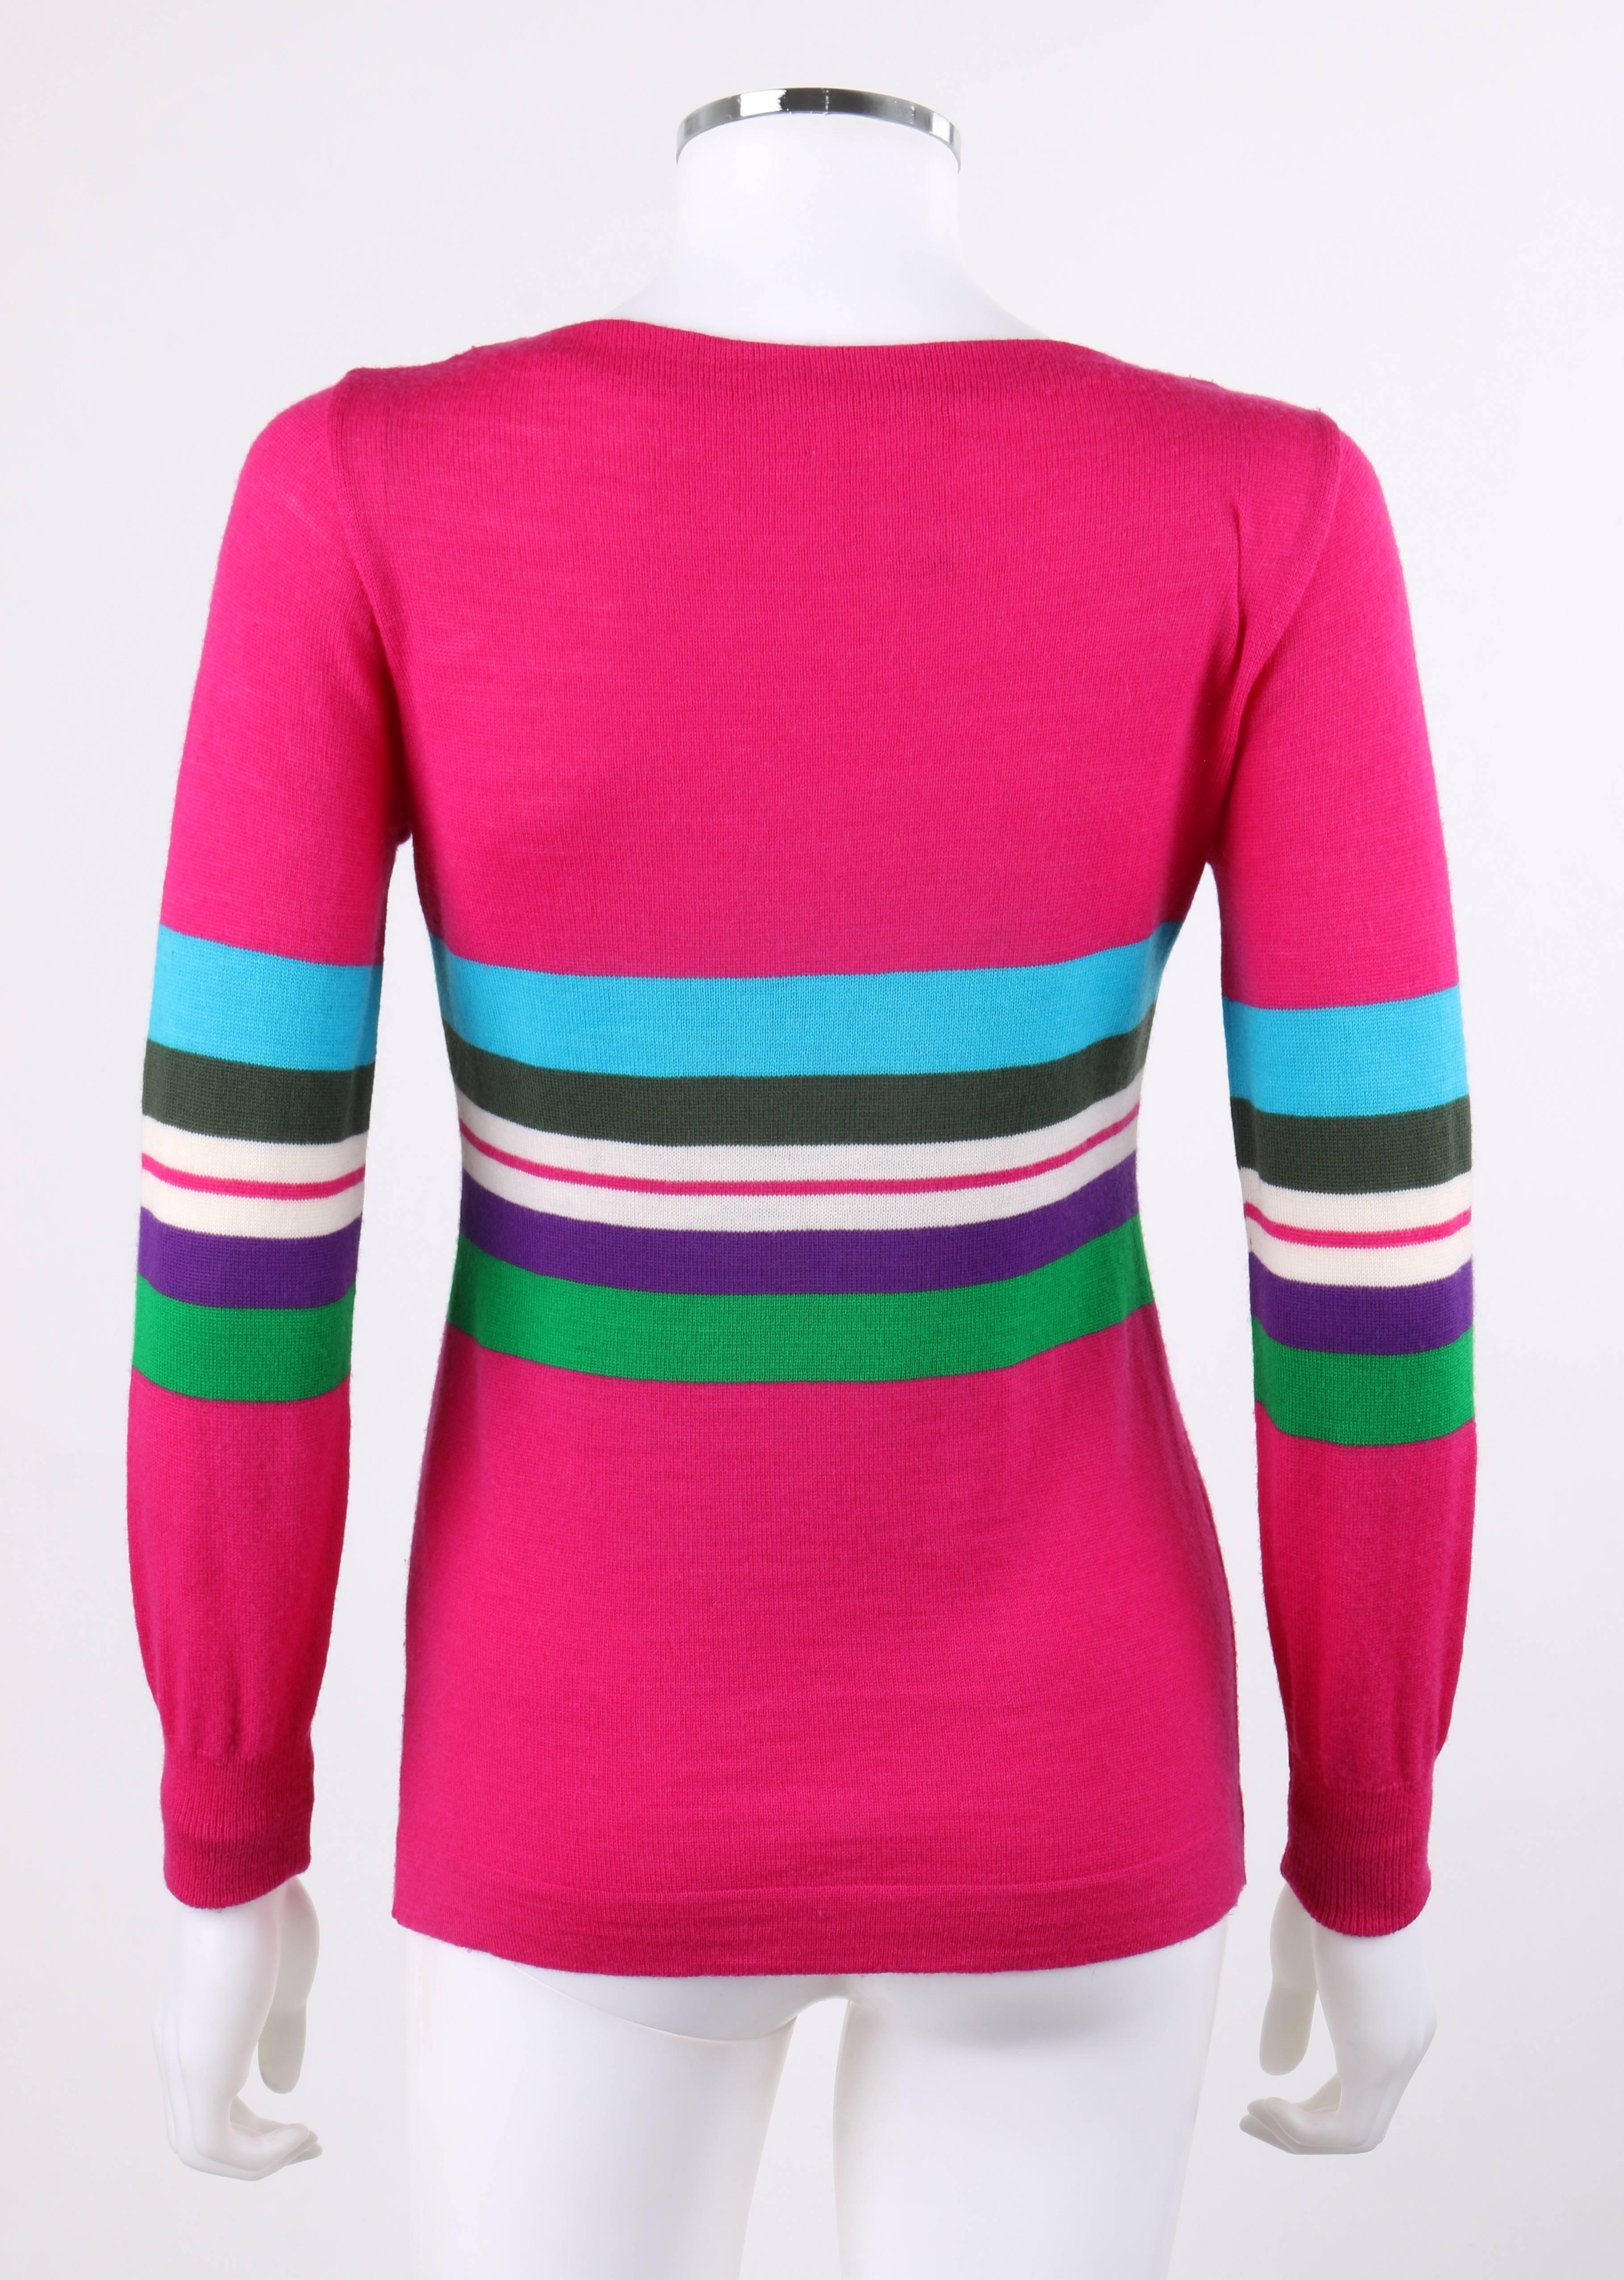 EMILIO PUCCI c.1970's Fuchsia Pink Wool Striped Knit Sweater Crewneck Top In Excellent Condition In Thiensville, WI